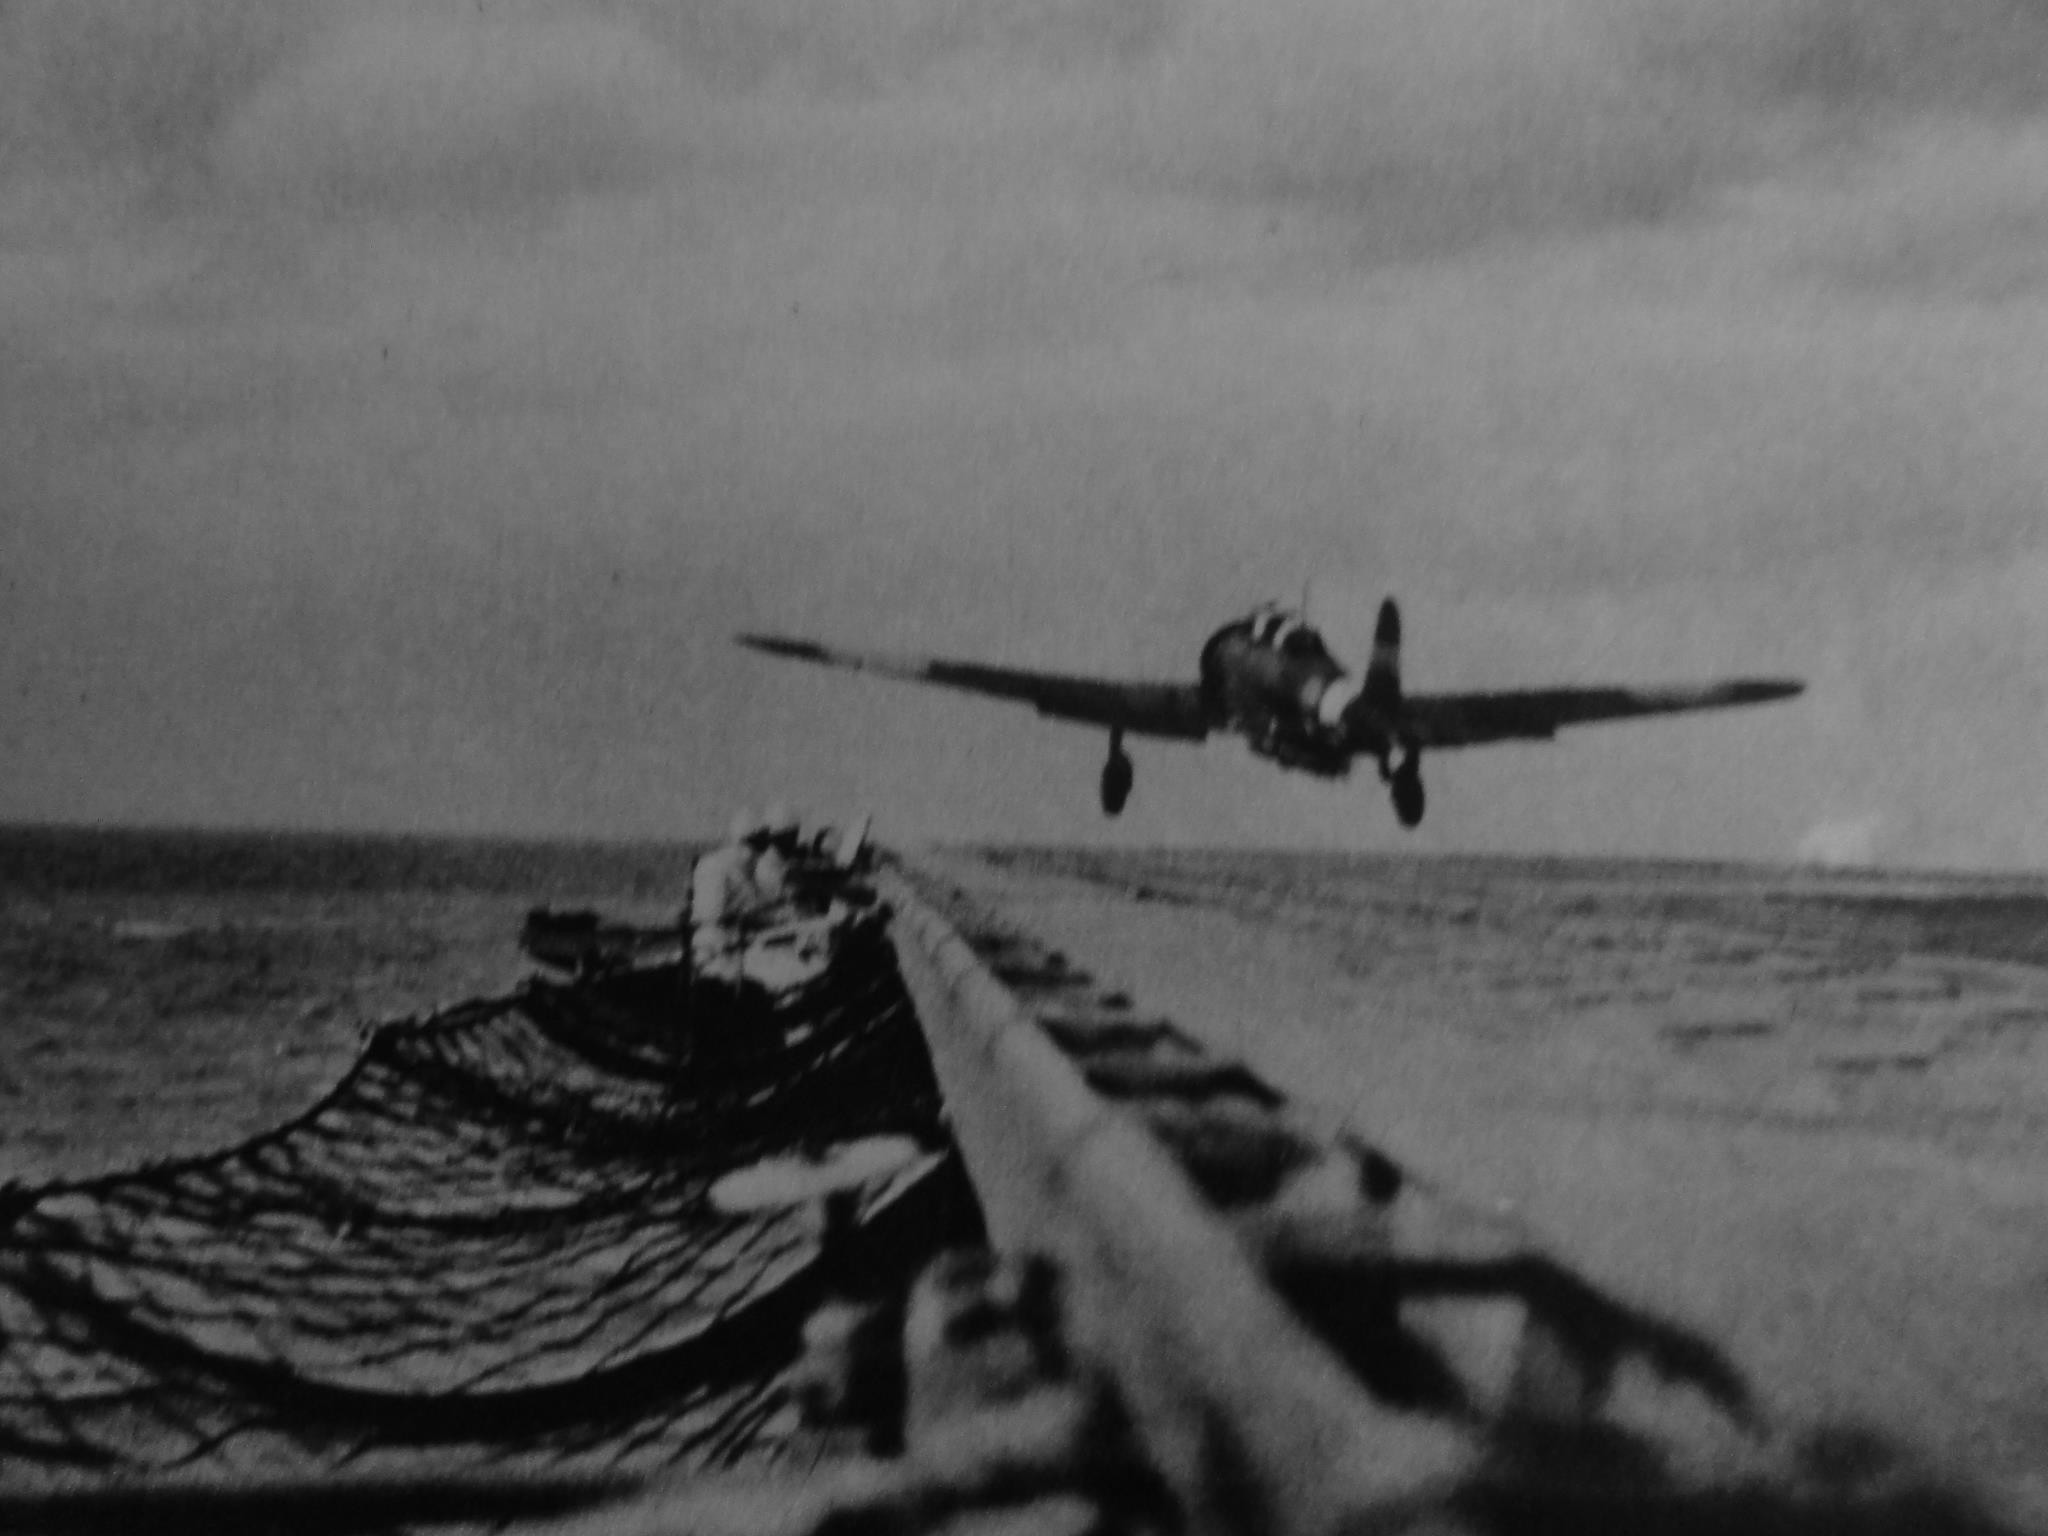 B5N aircraft taking off from a carrier, 1941-1942